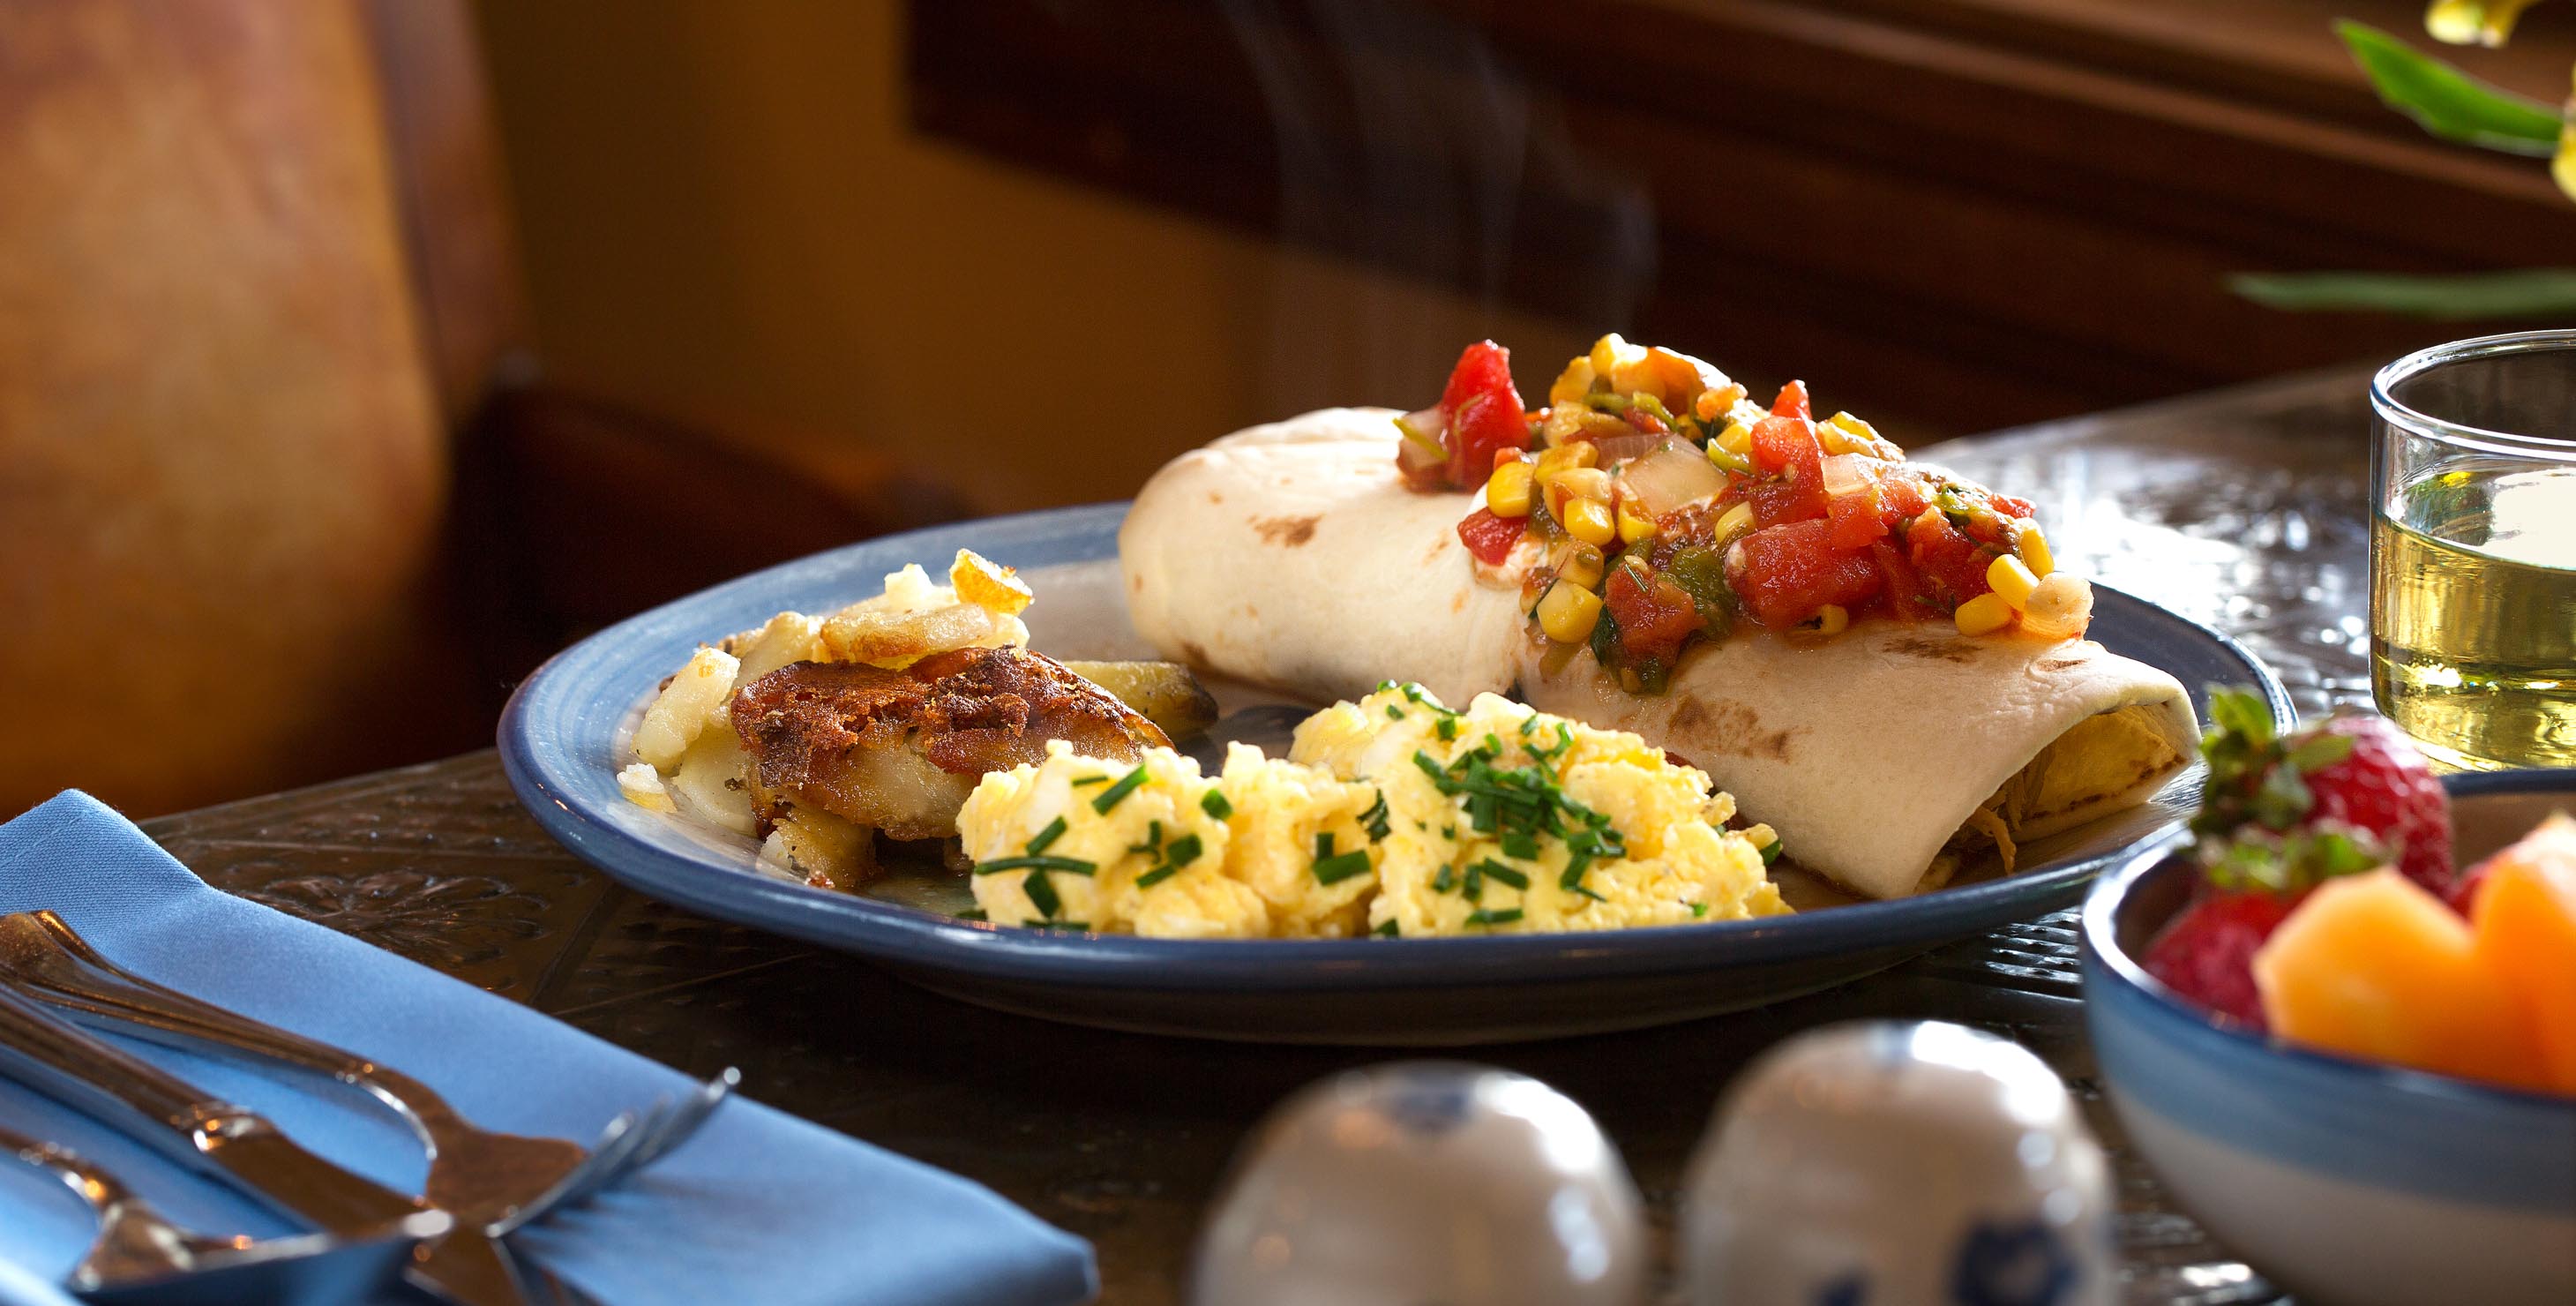 Breakfast burrito topped with corn salsa served with a side of breakfast potatoes and eggs